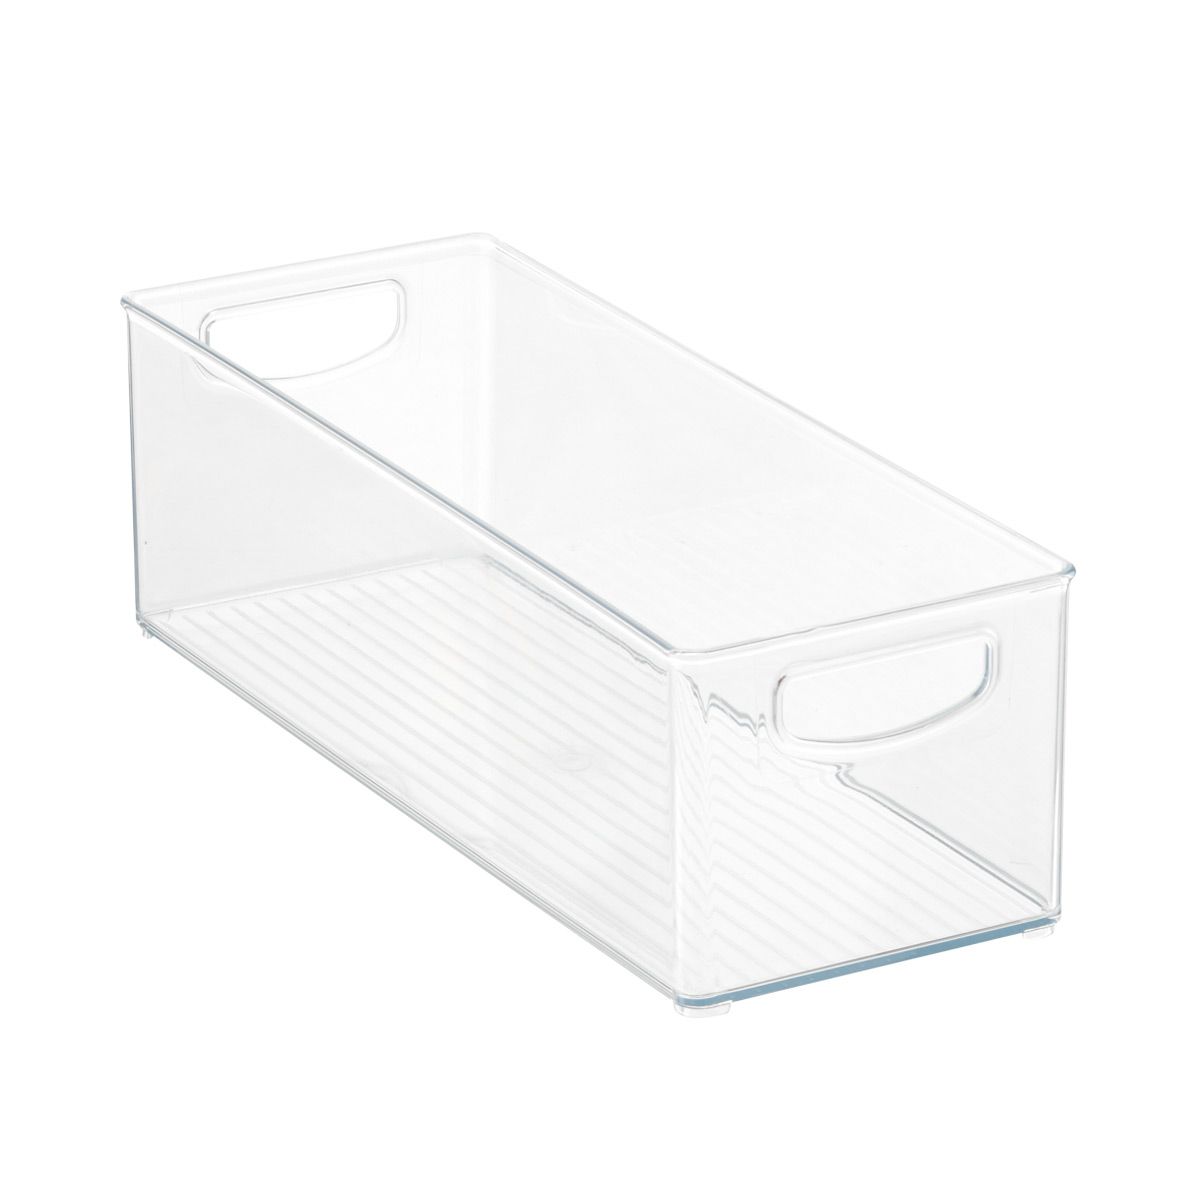 iDESIGN Linus Medium Deep Drawer Bin Clear | The Container Store